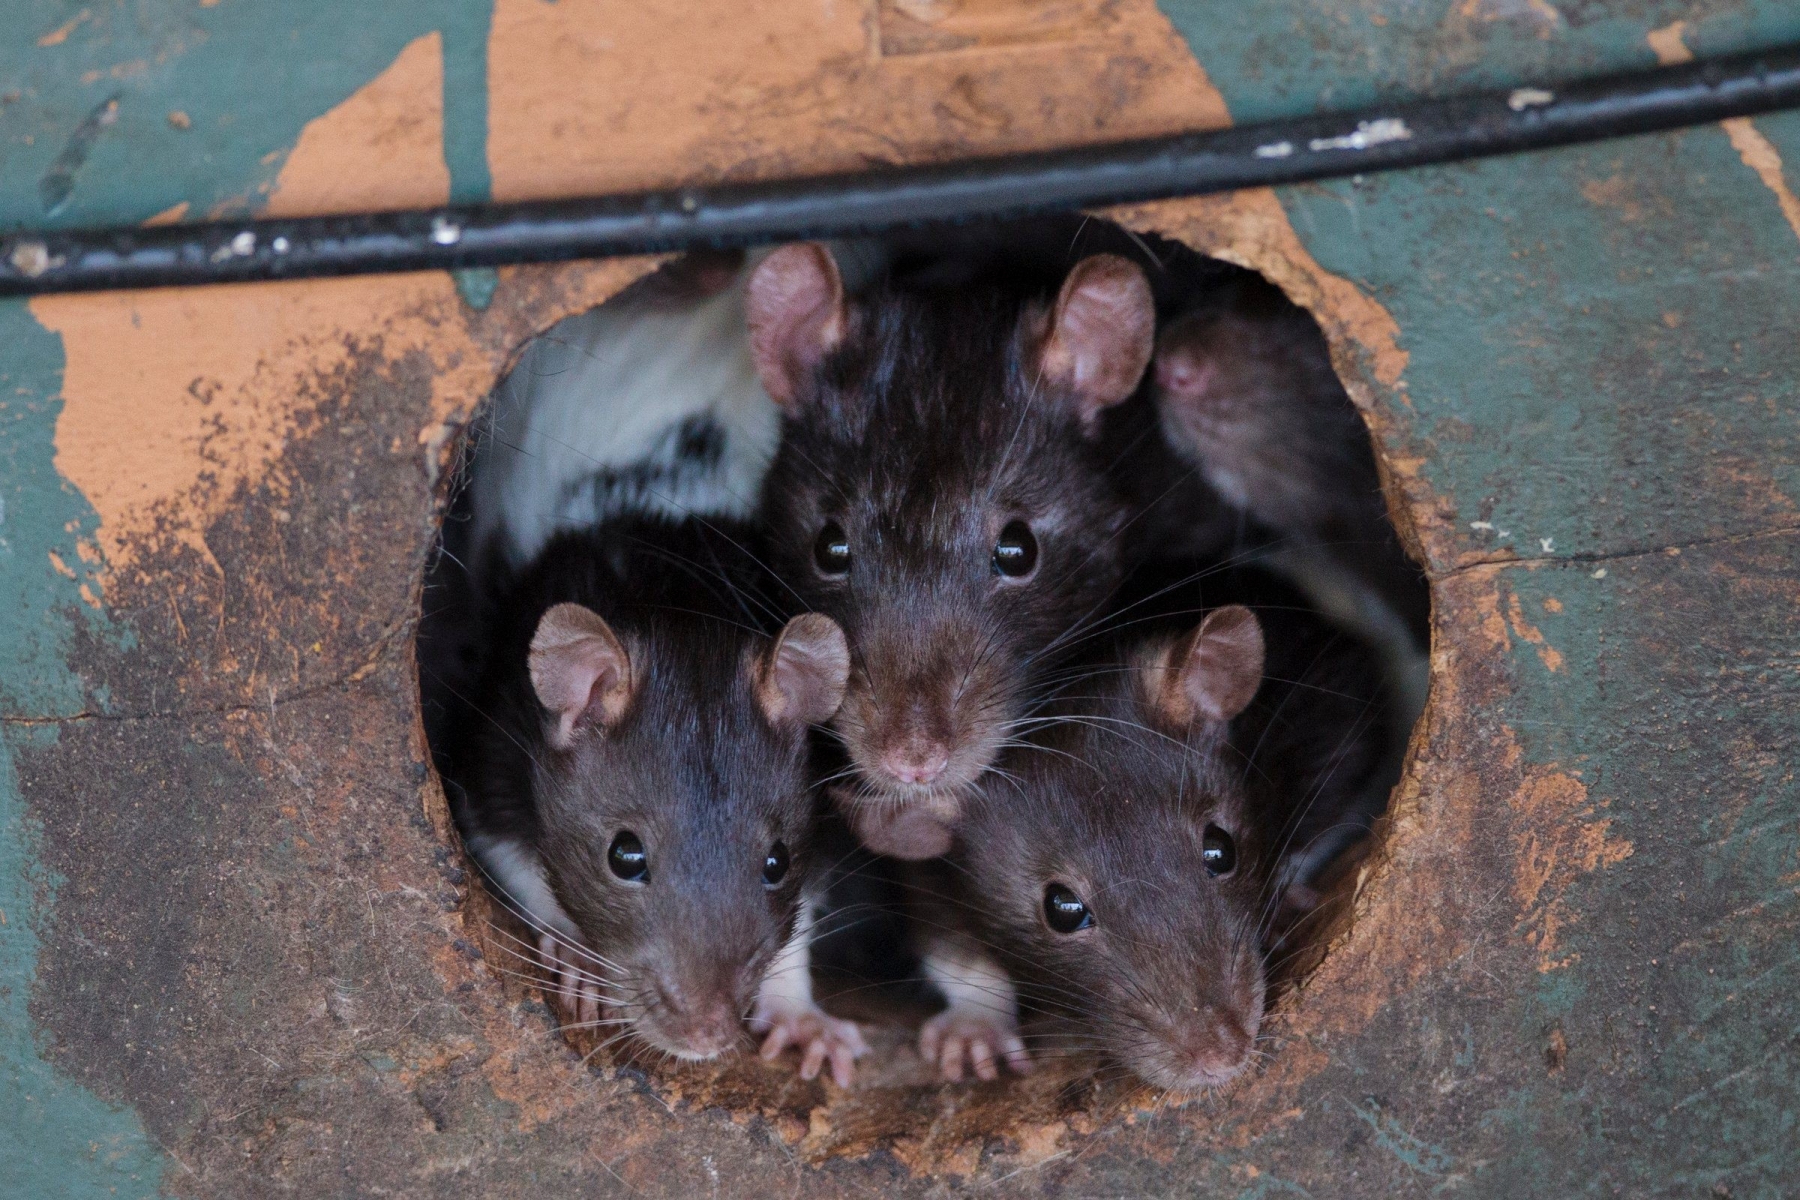 Rats come out of a hole at a home after the Critter Cafe Rescue was shut down last week when authorities found thousands of rats inside the residence in Fruitport Twp., Mich., Wednesday, June 3, 2015. Owner Christine Lea Bishop has been barred from the home. Rabbits, ducks and cats also were cared for at the animal rescue northwest of Grand Rapids. Many of the animals have been sent to other agencies for care. (Joel Bissell/The Chronicle via AP) MANDATORY CREDIT ALL LOCAL TV OUT AND LOCAL TV INTERNET OUT CRITTER CAFE CONDEMNED